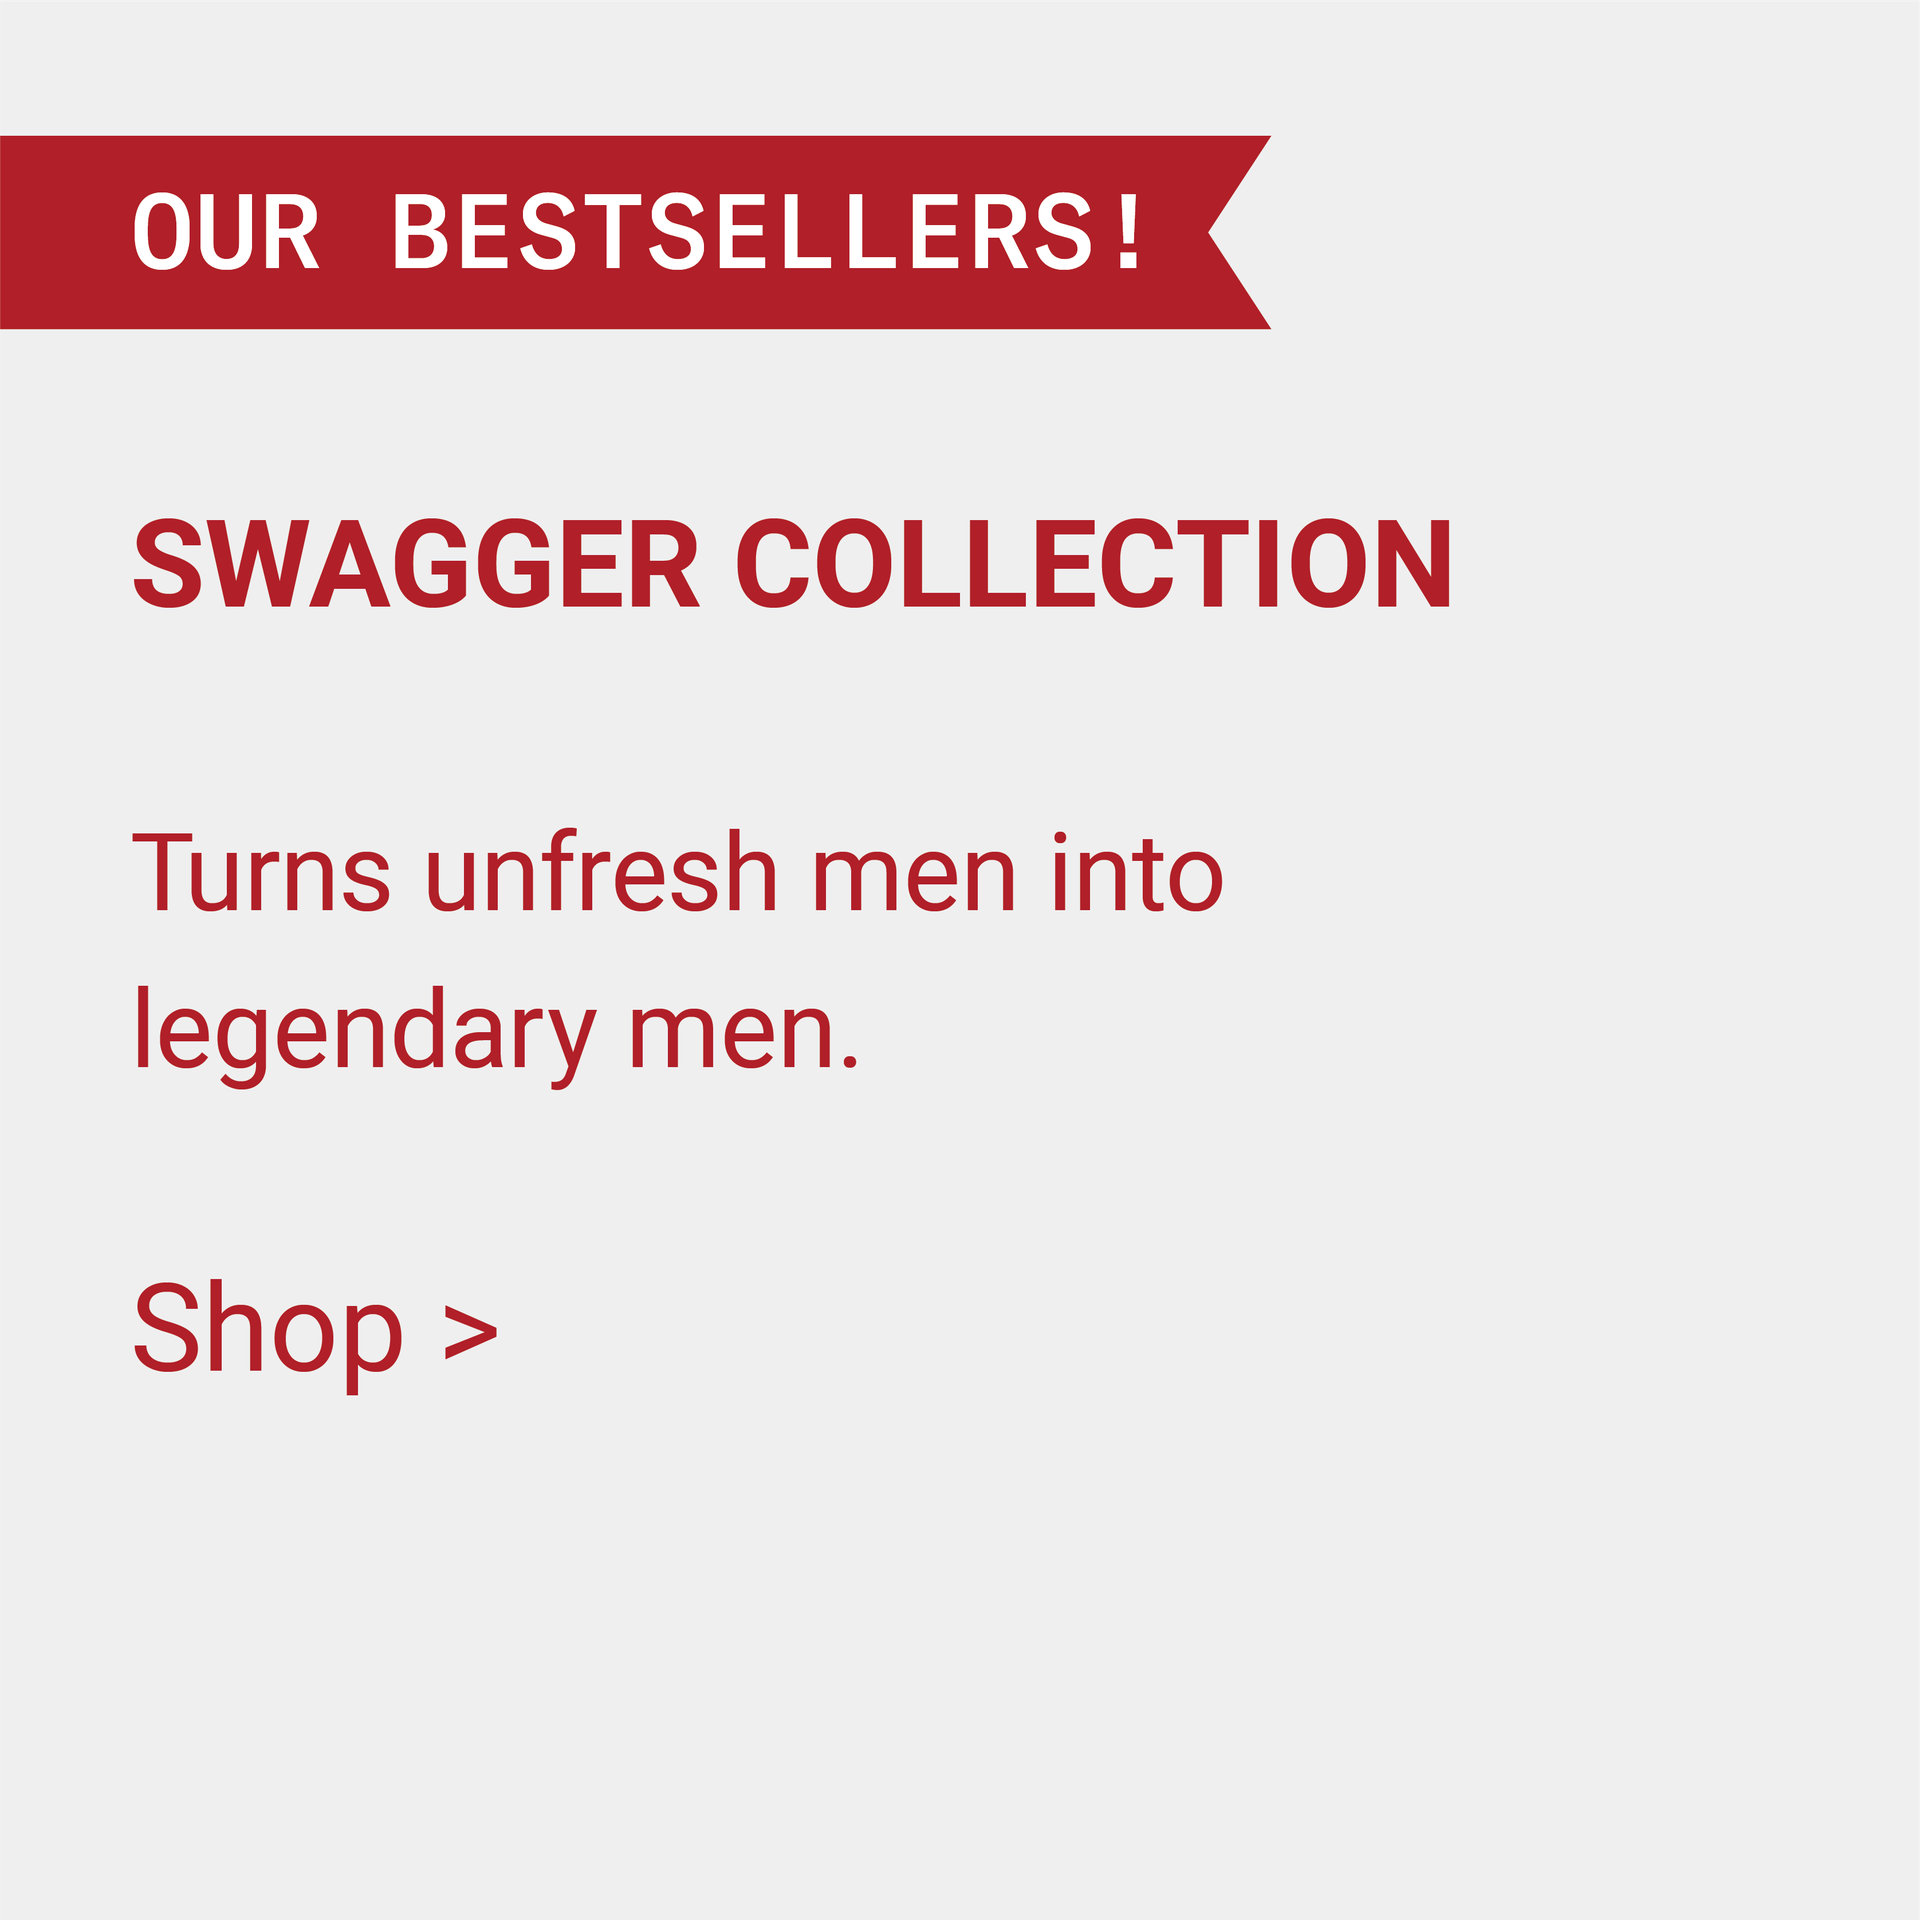 Swagger Collection